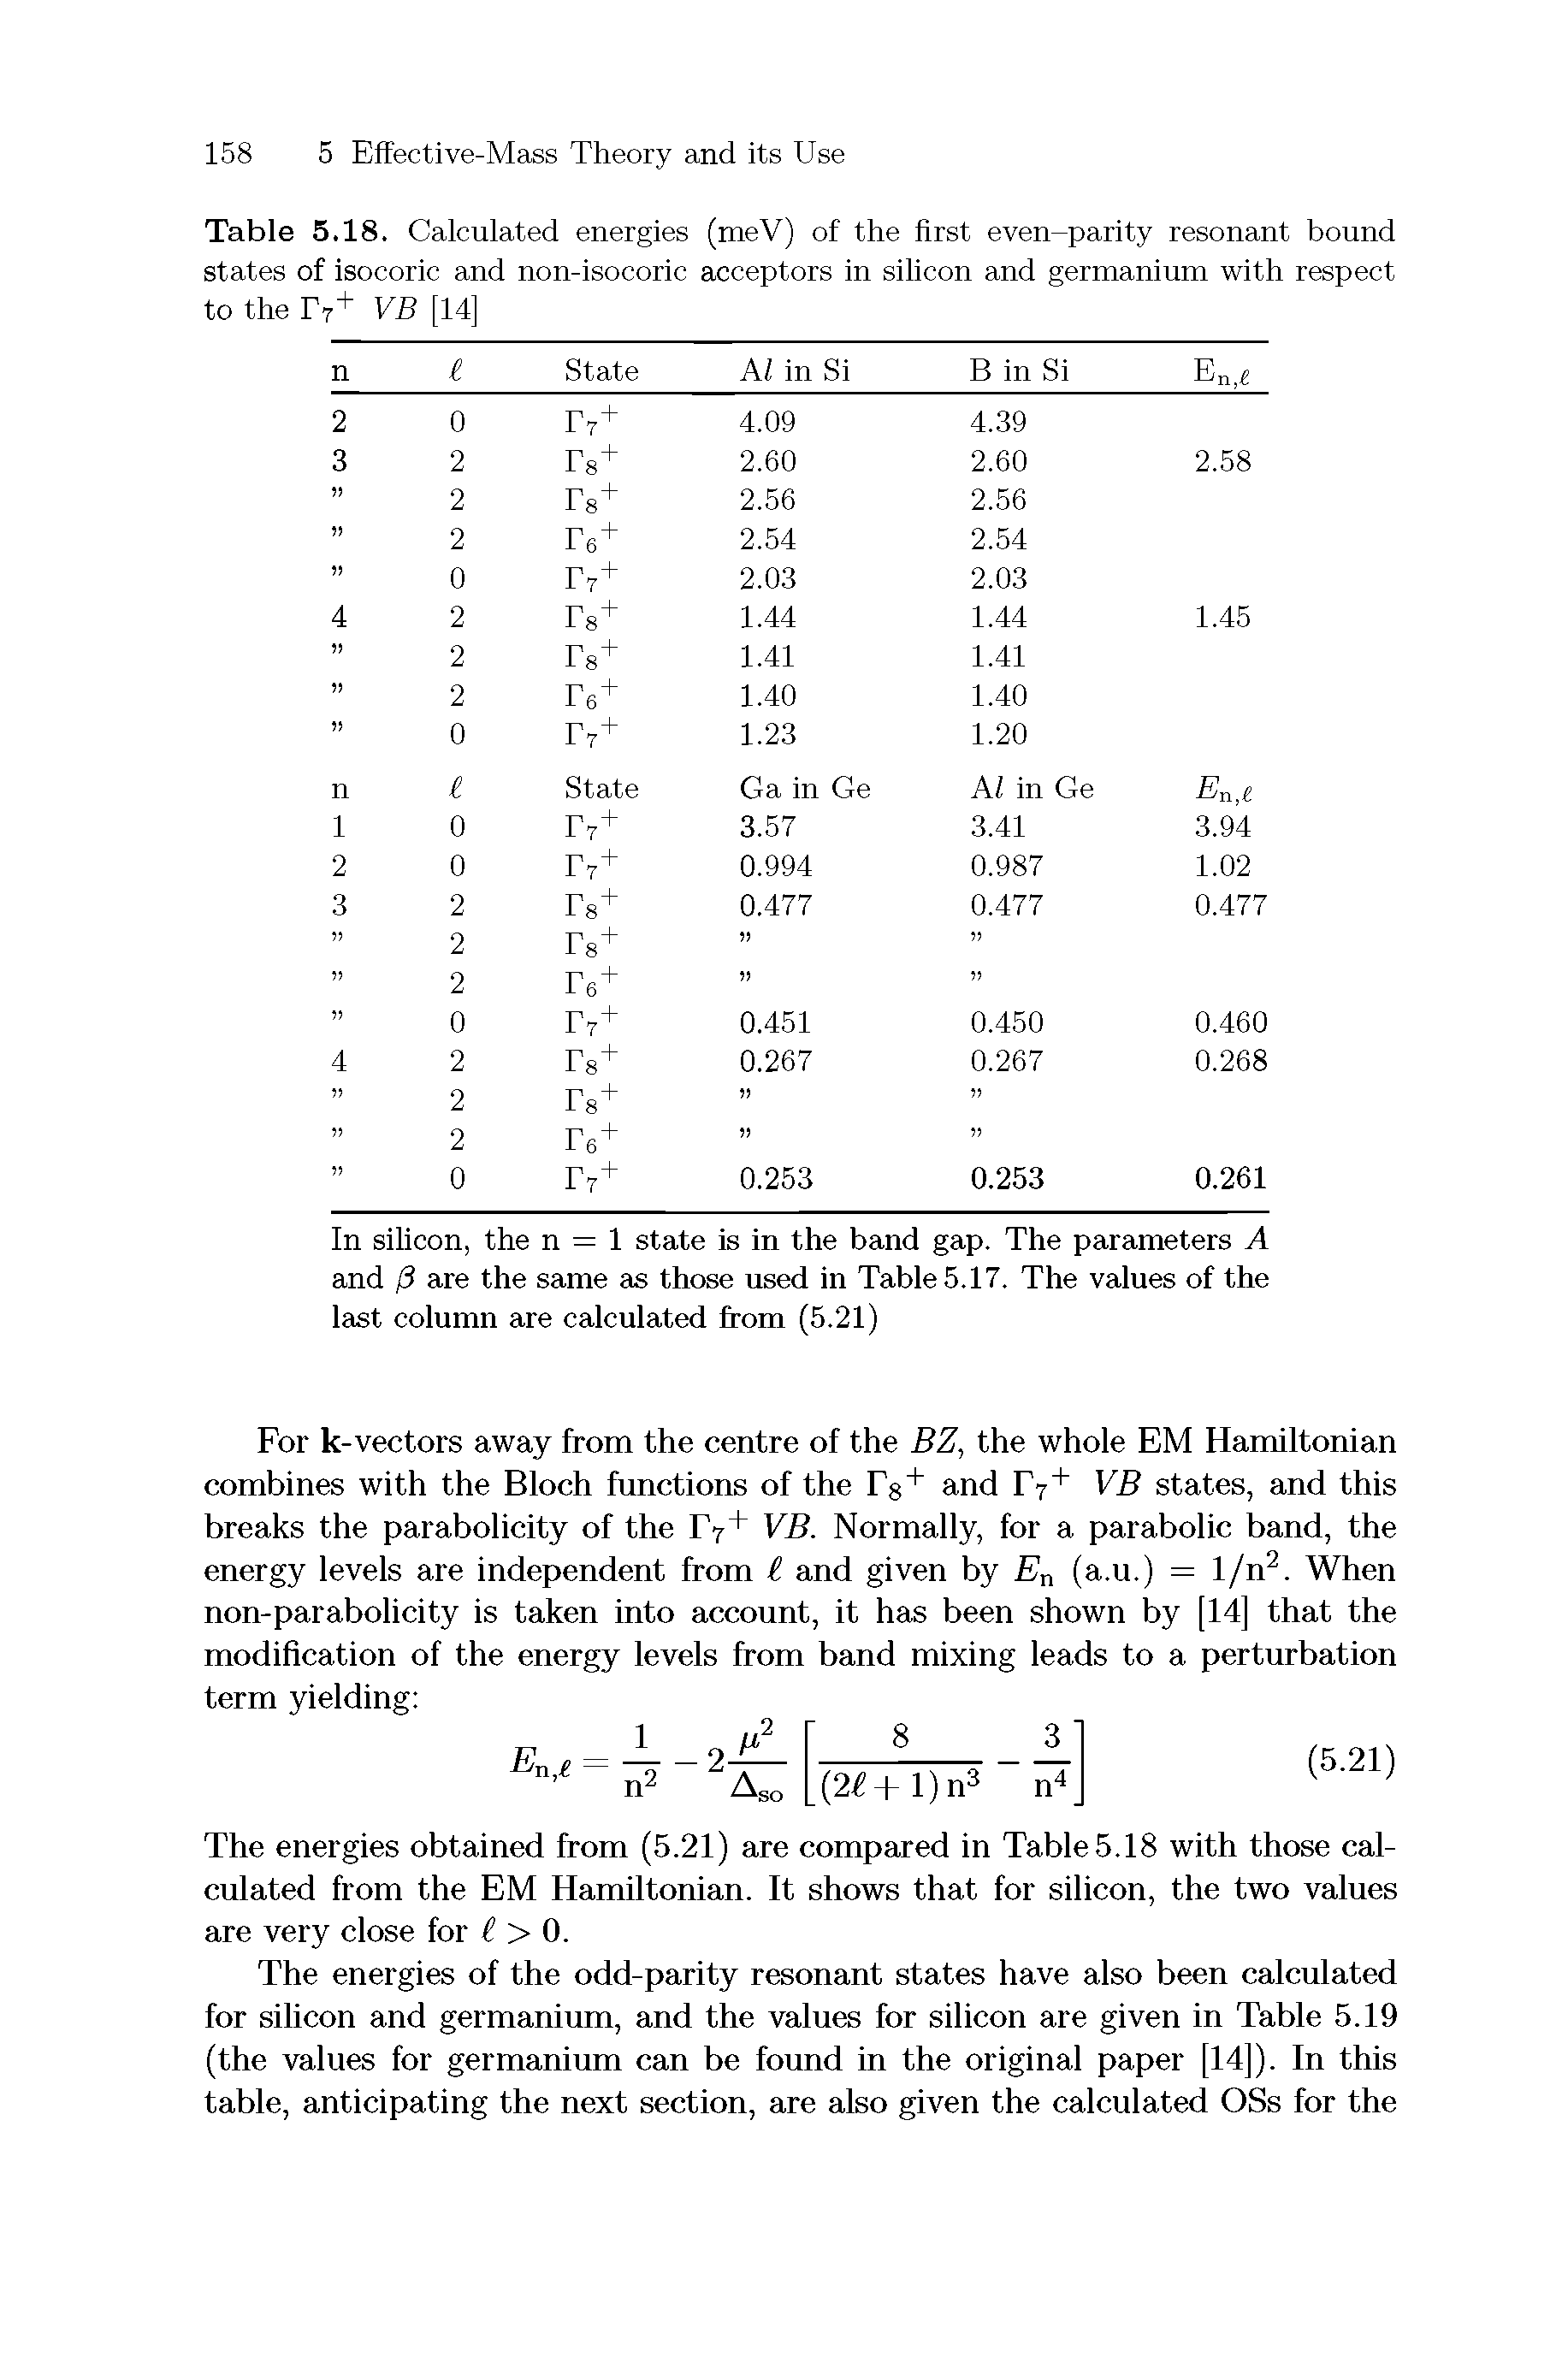 Table 5.18. Calculated energies (meV) of the first even-parity resonant bound states of isocoric and non-isocoric acceptors in silicon and germanium with respect to the 1 7+ VB [14]...